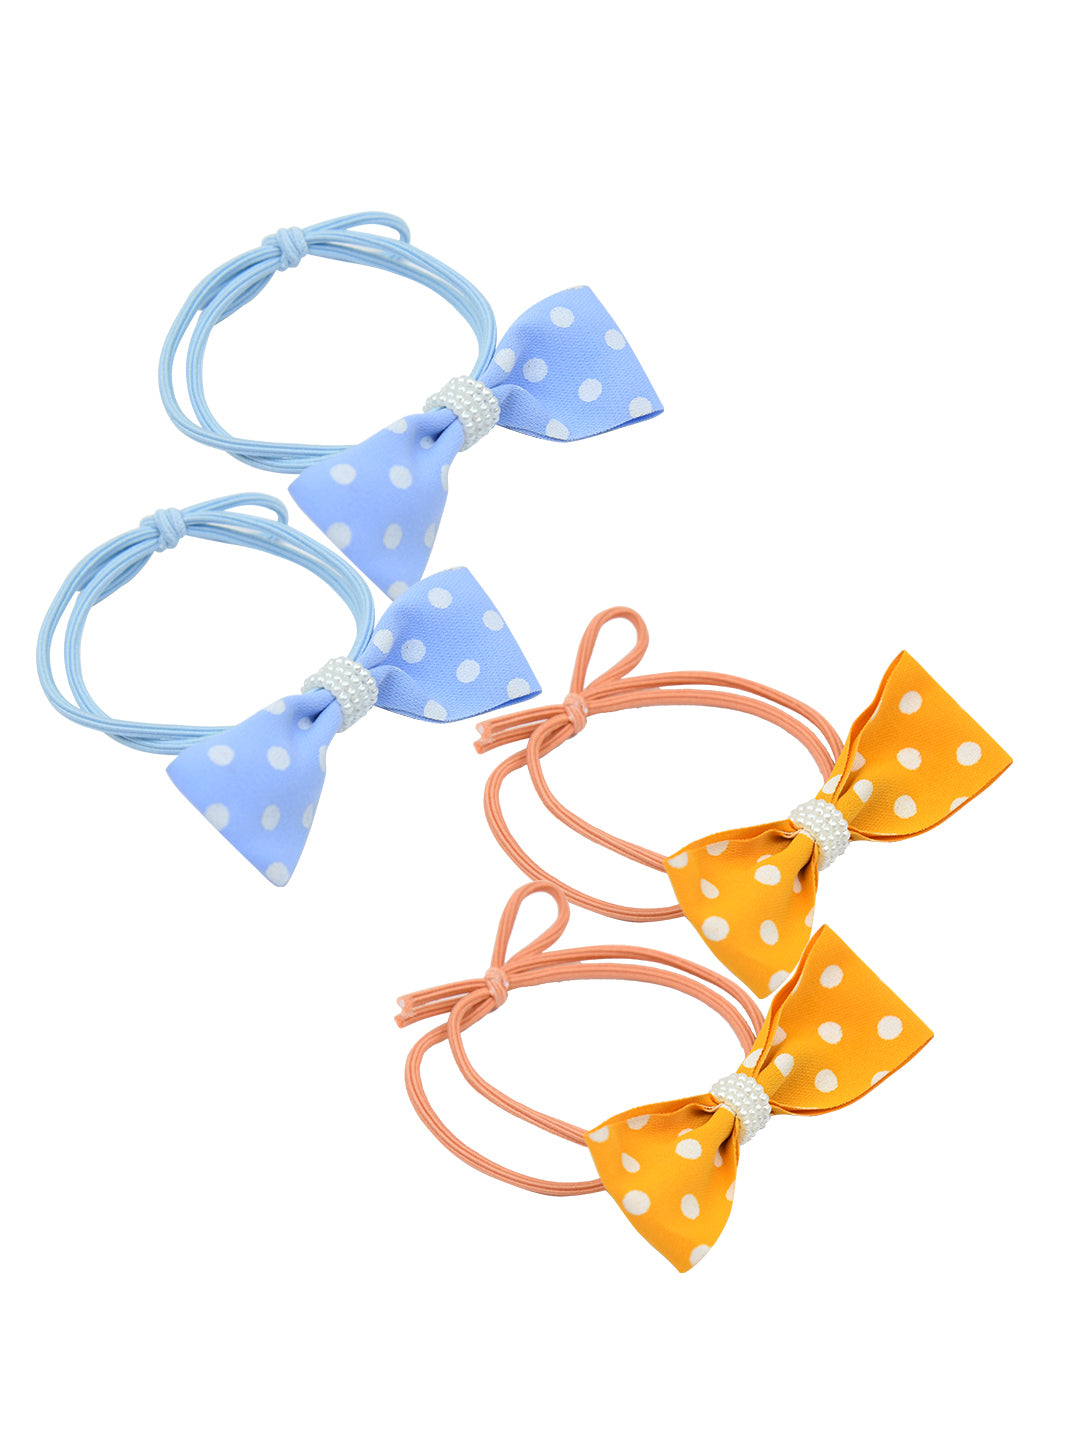 Set of 4 Multicolour Hair Ties for Girls